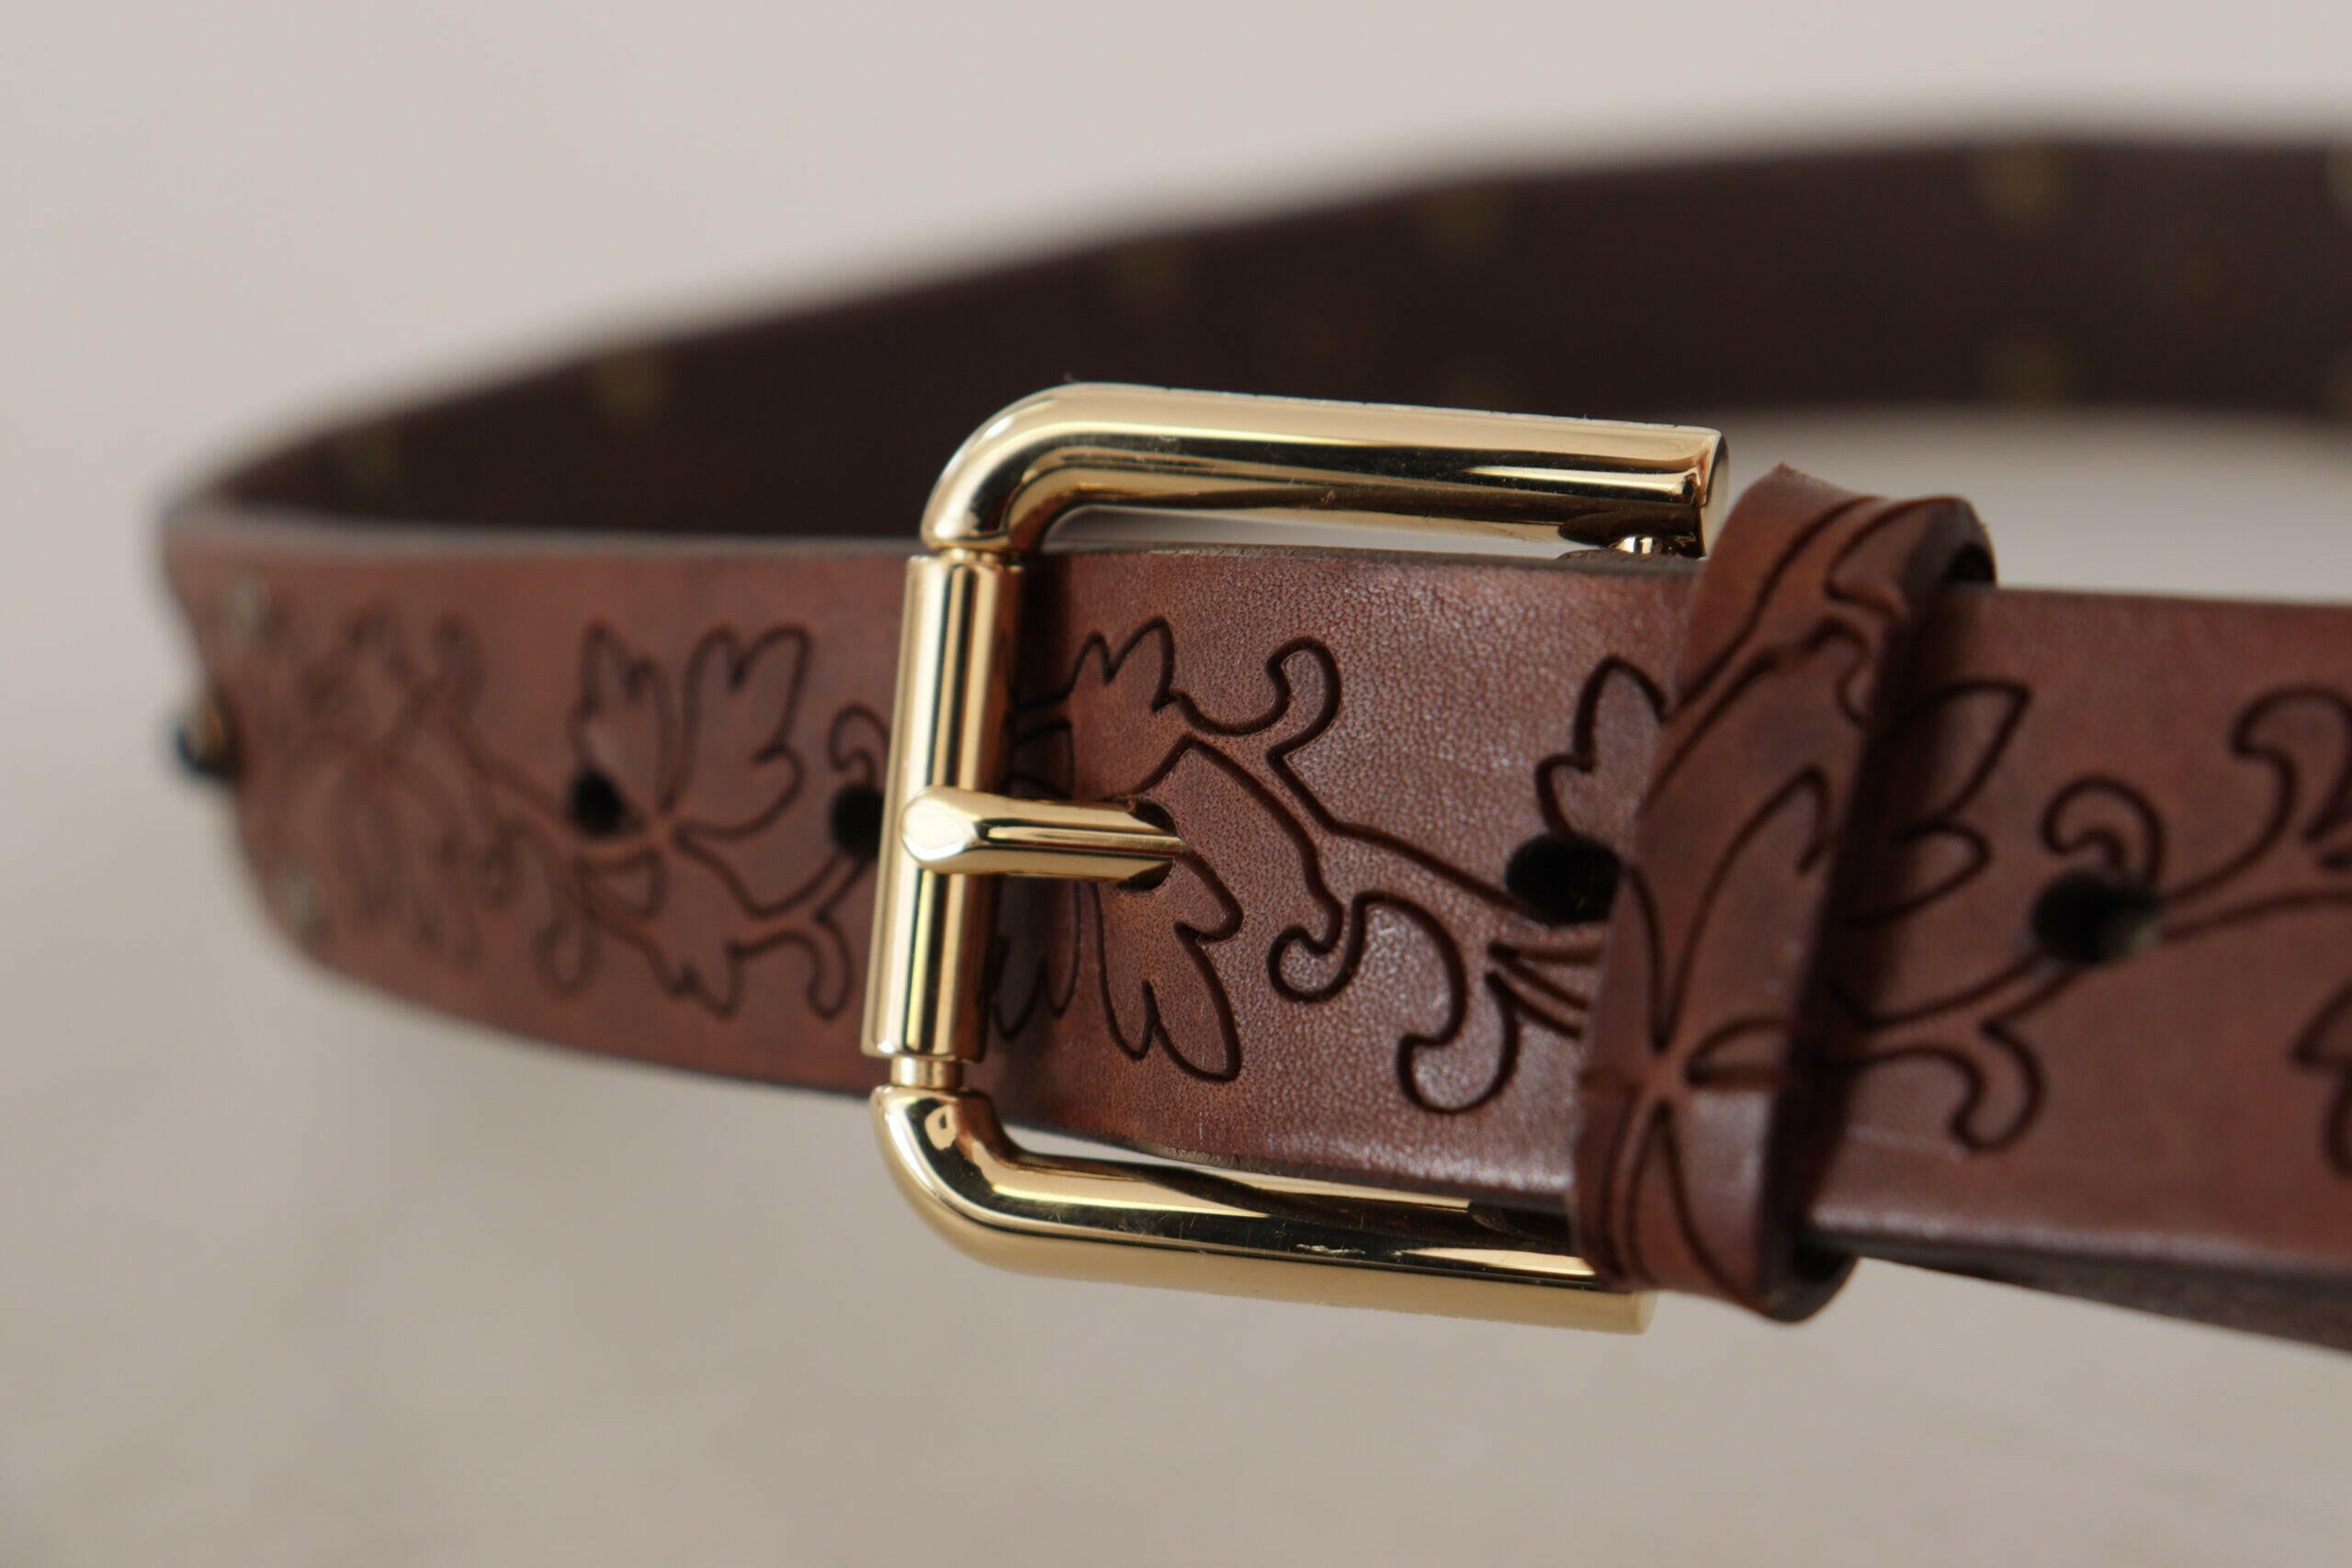 Dolce & Gabbana Brown Leather Floral Studded Metal Buckle Belt - GENUINE AUTHENTIC BRAND LLC  